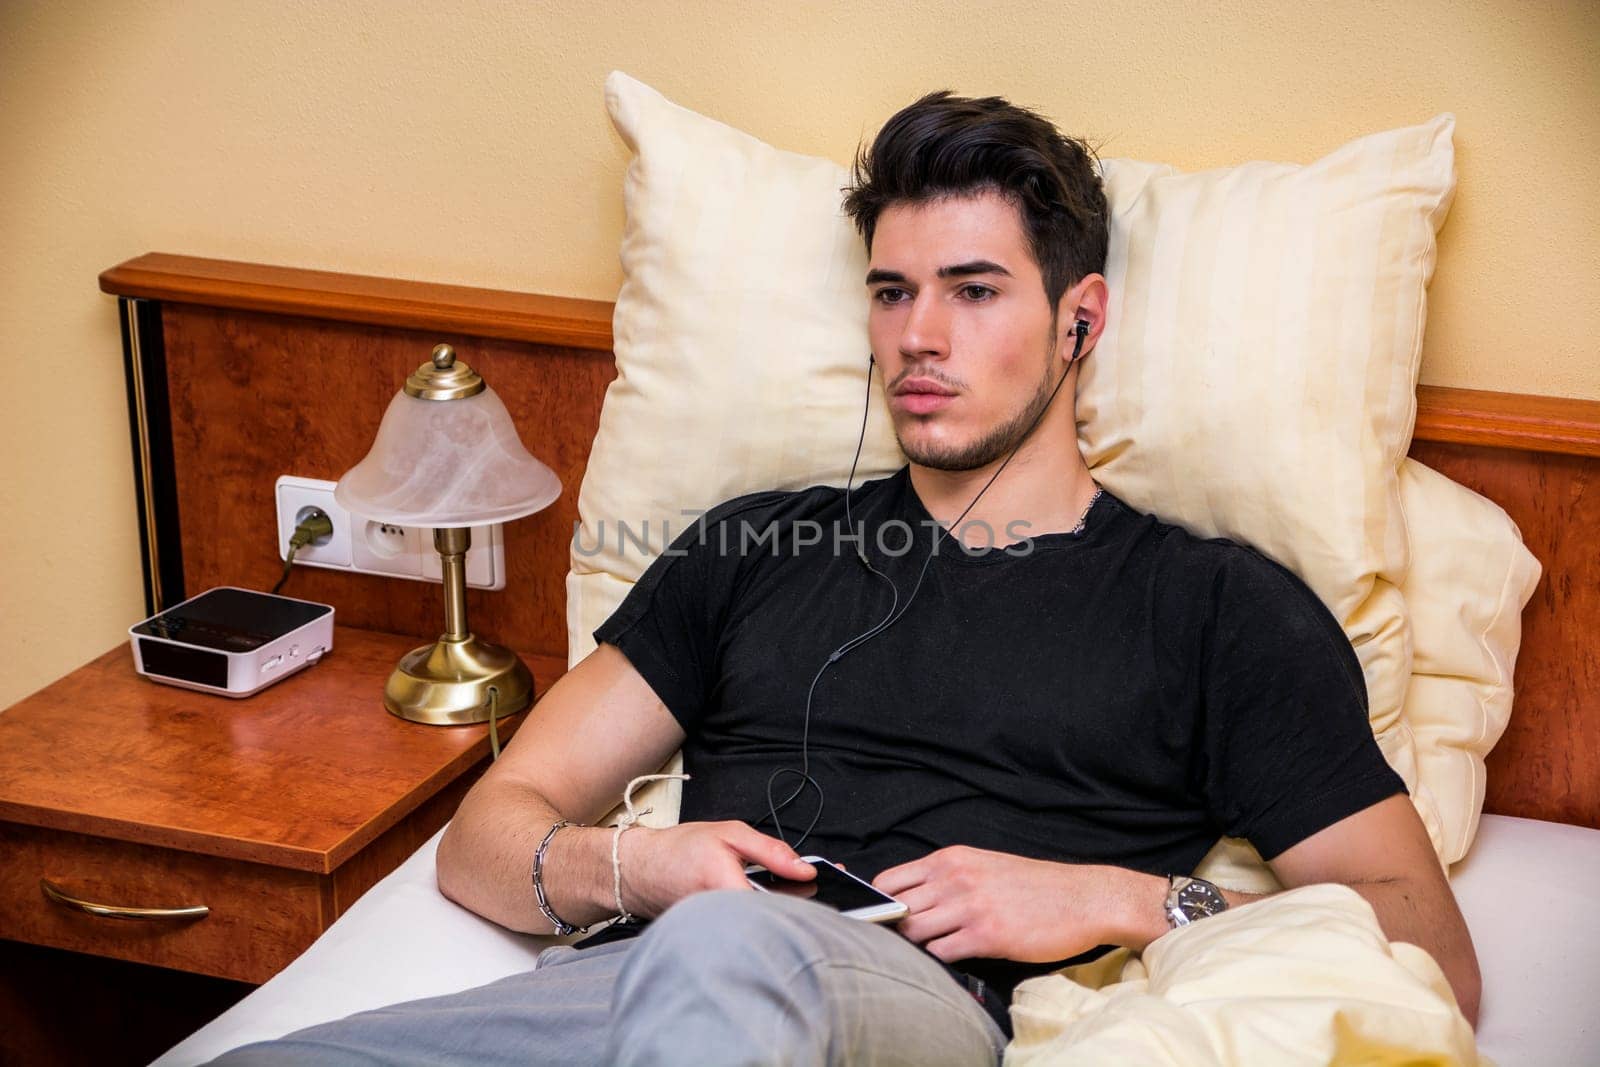 Photo of a young man enjoying music in bed by artofphoto